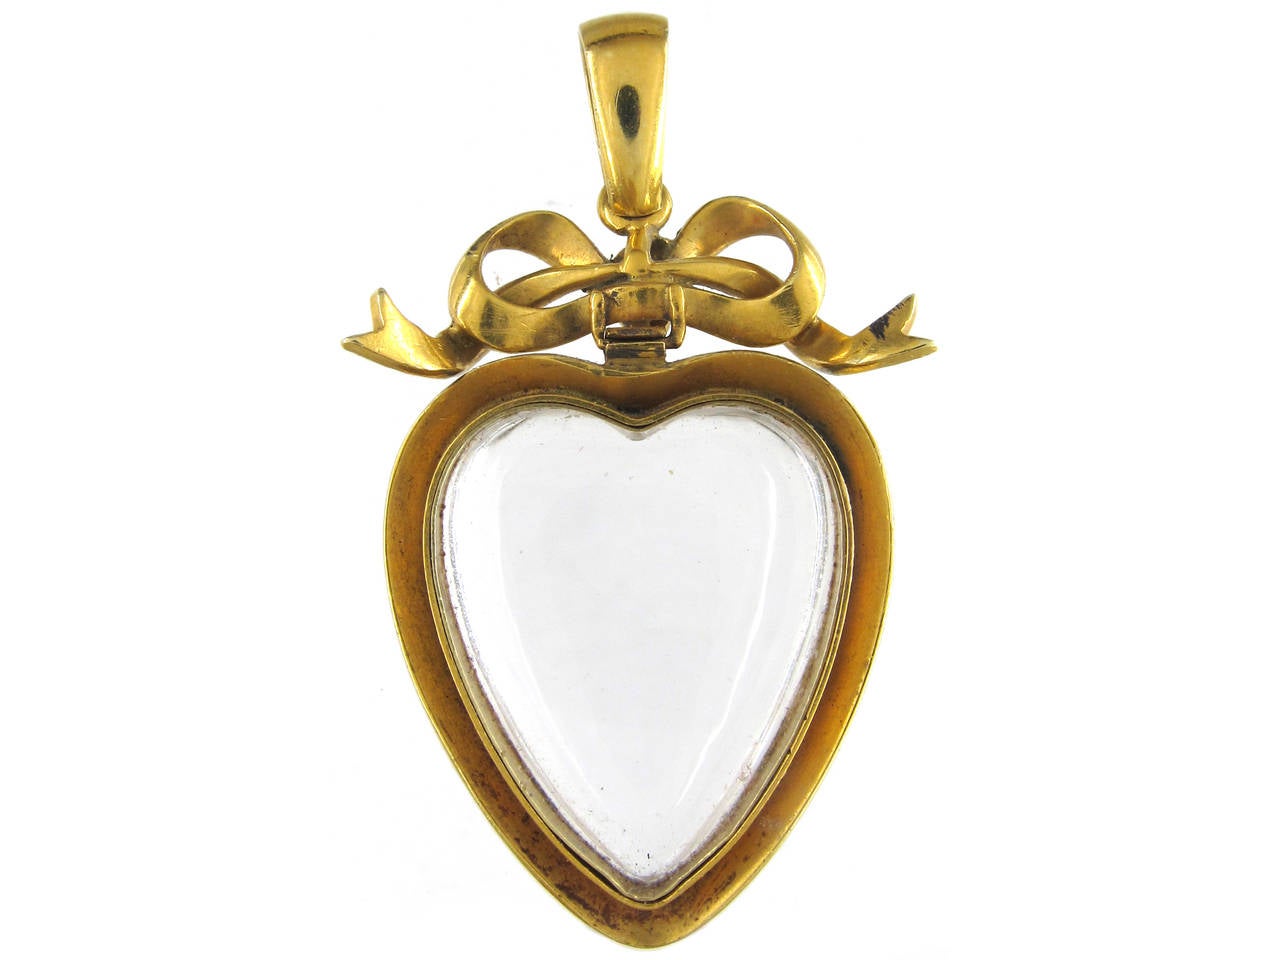 A rare 18ct gold heart shaped pendant set with a rock crystal inner heart and natural split pearls. It has a pretty bow top set with split pearls and a loop similarly set with pearls. It was made circa 1890.